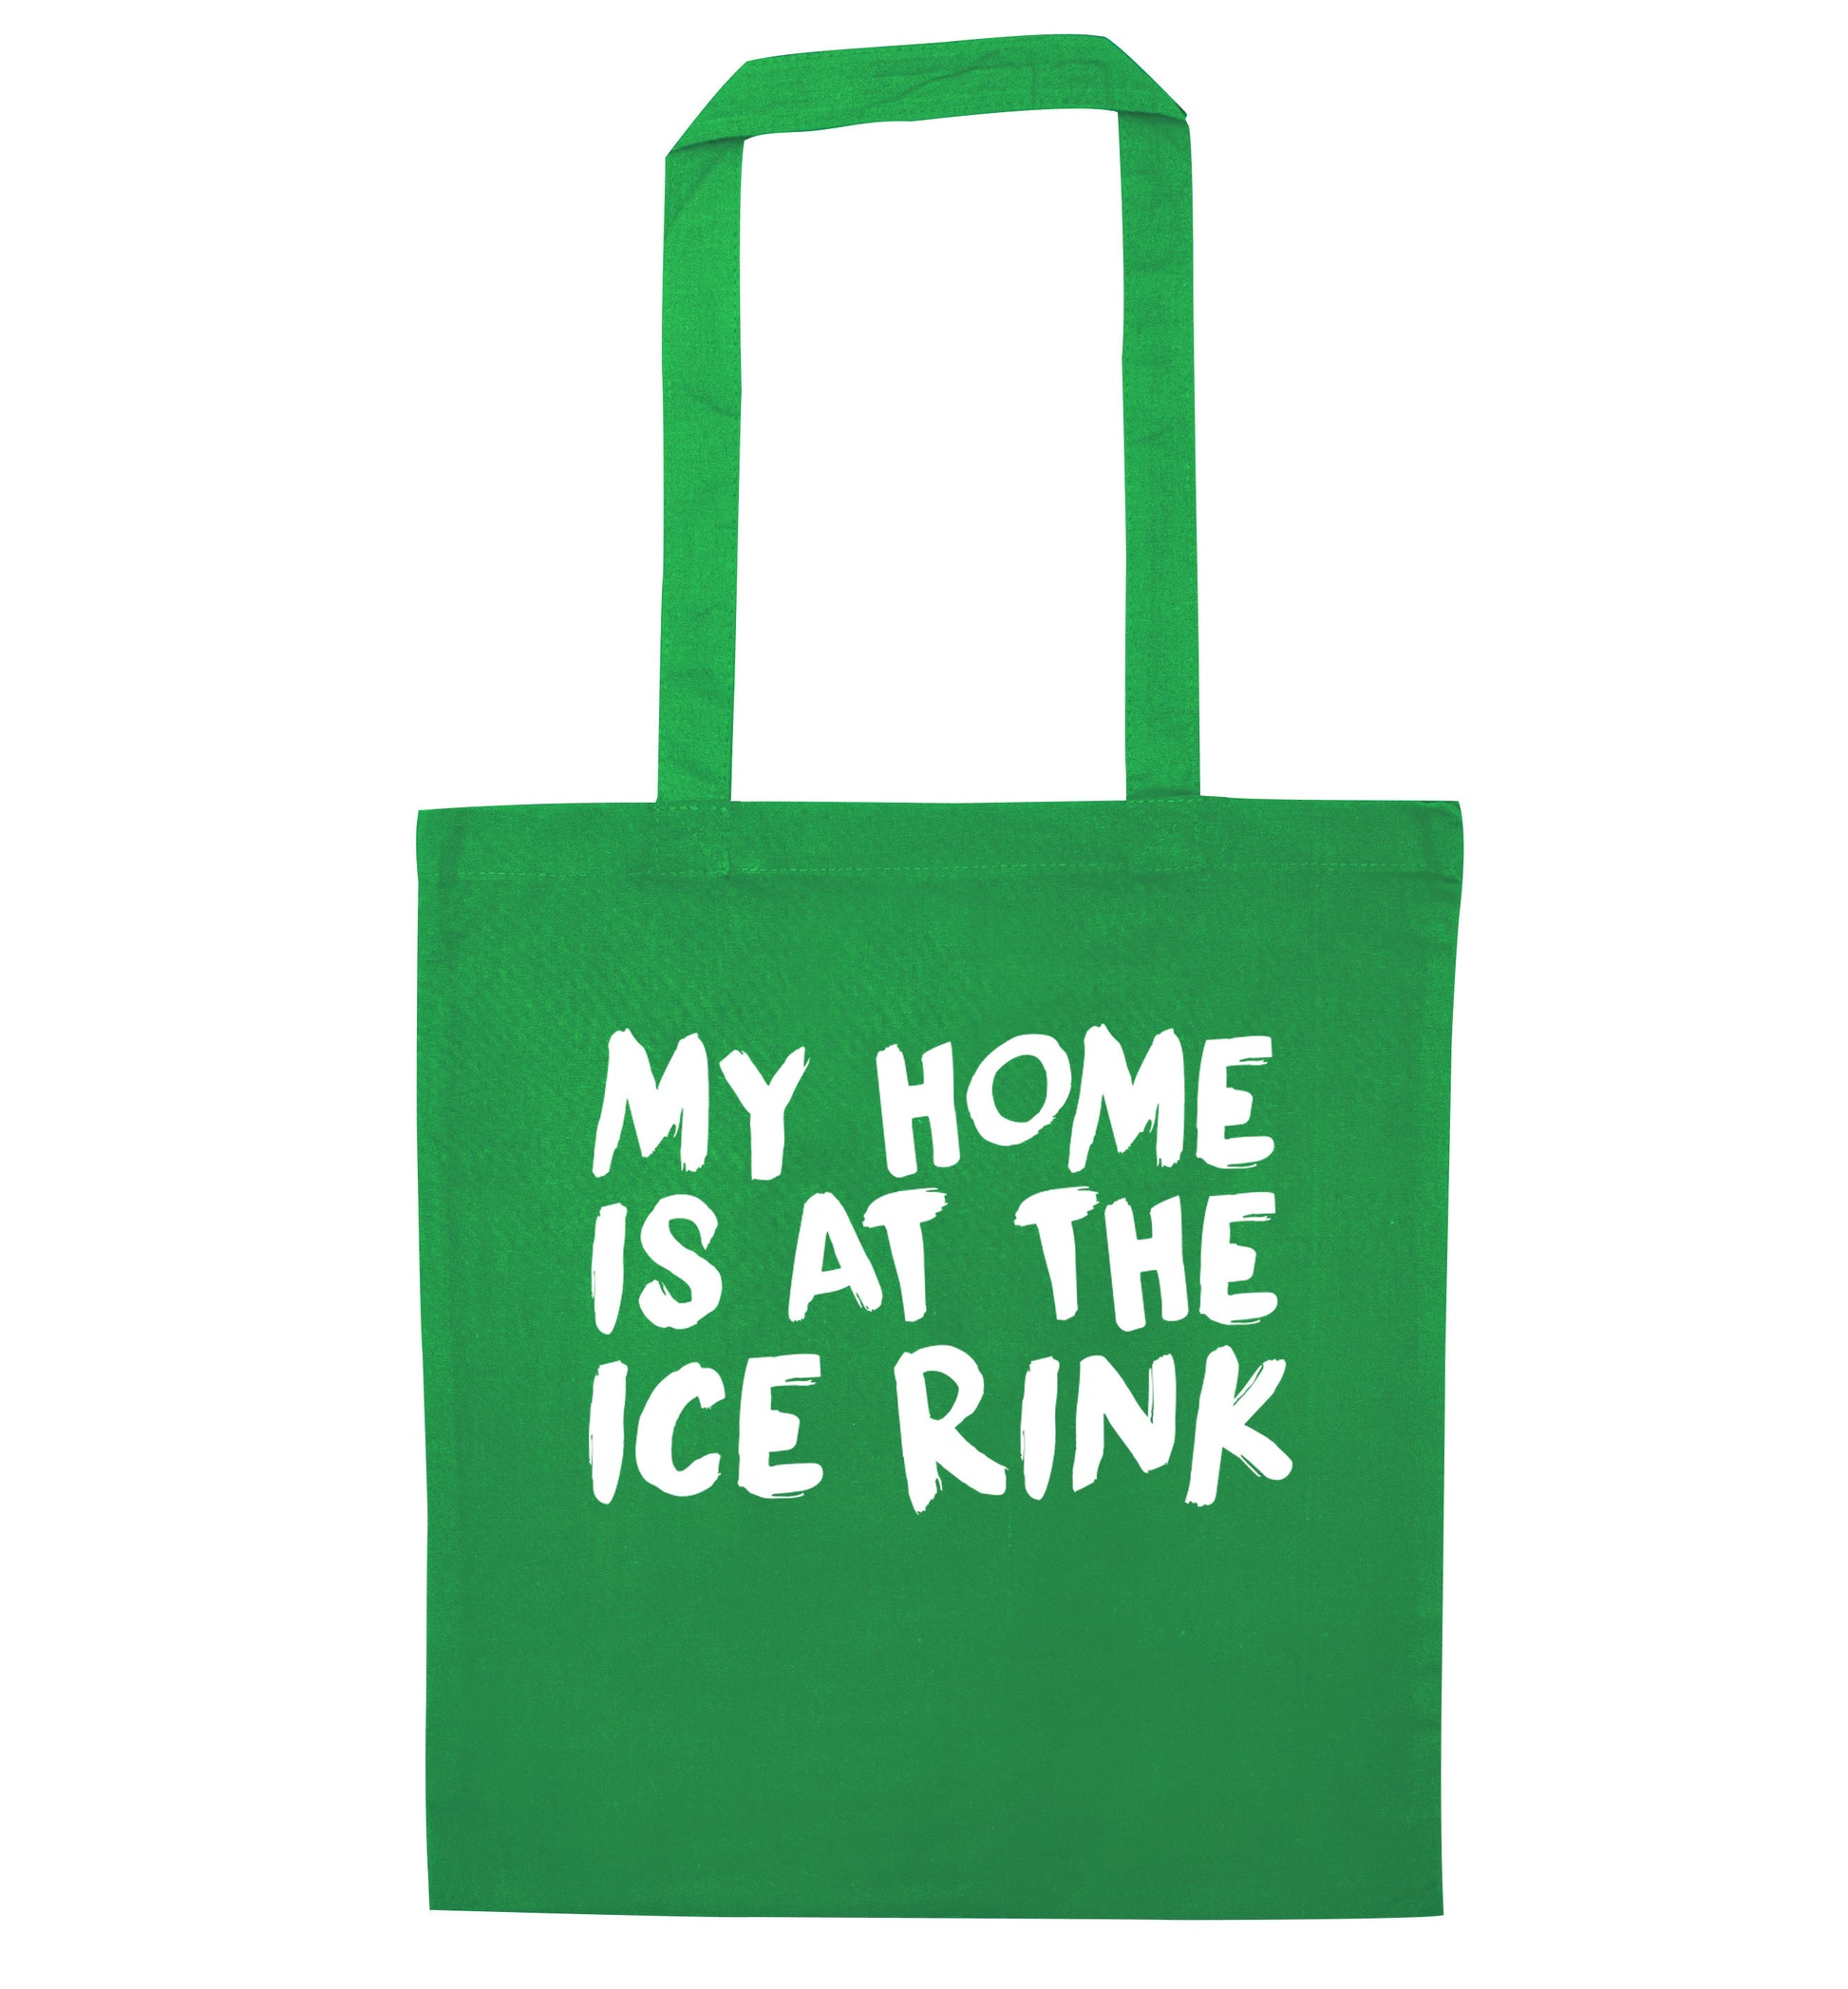 My home is at the ice rink green tote bag